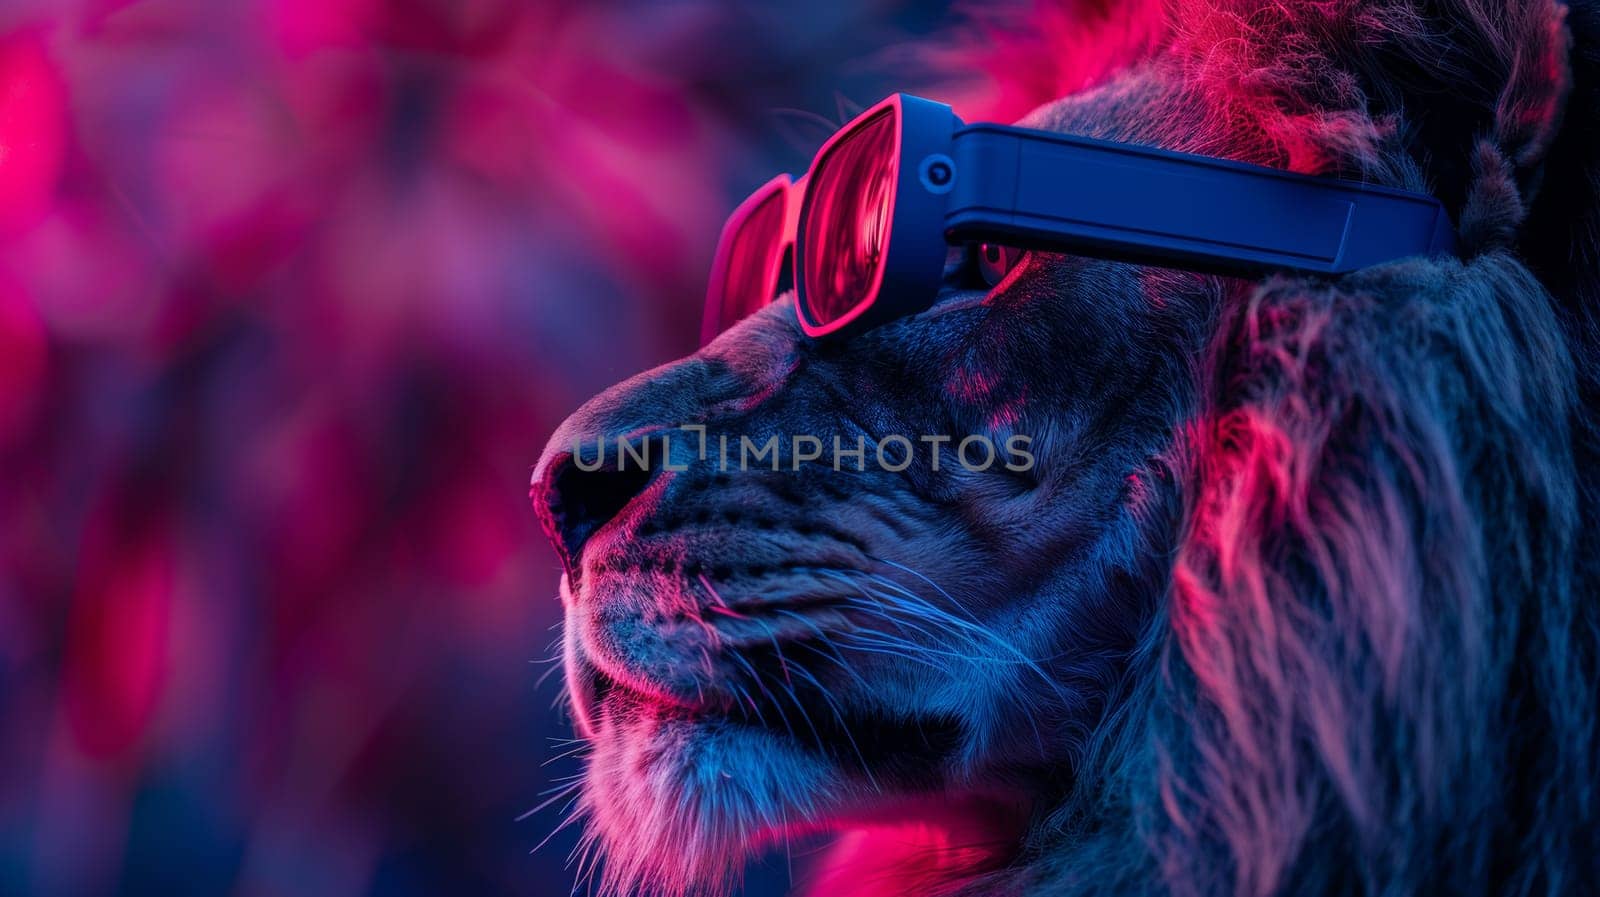 A lion wearing sunglasses and a red tie with blue background